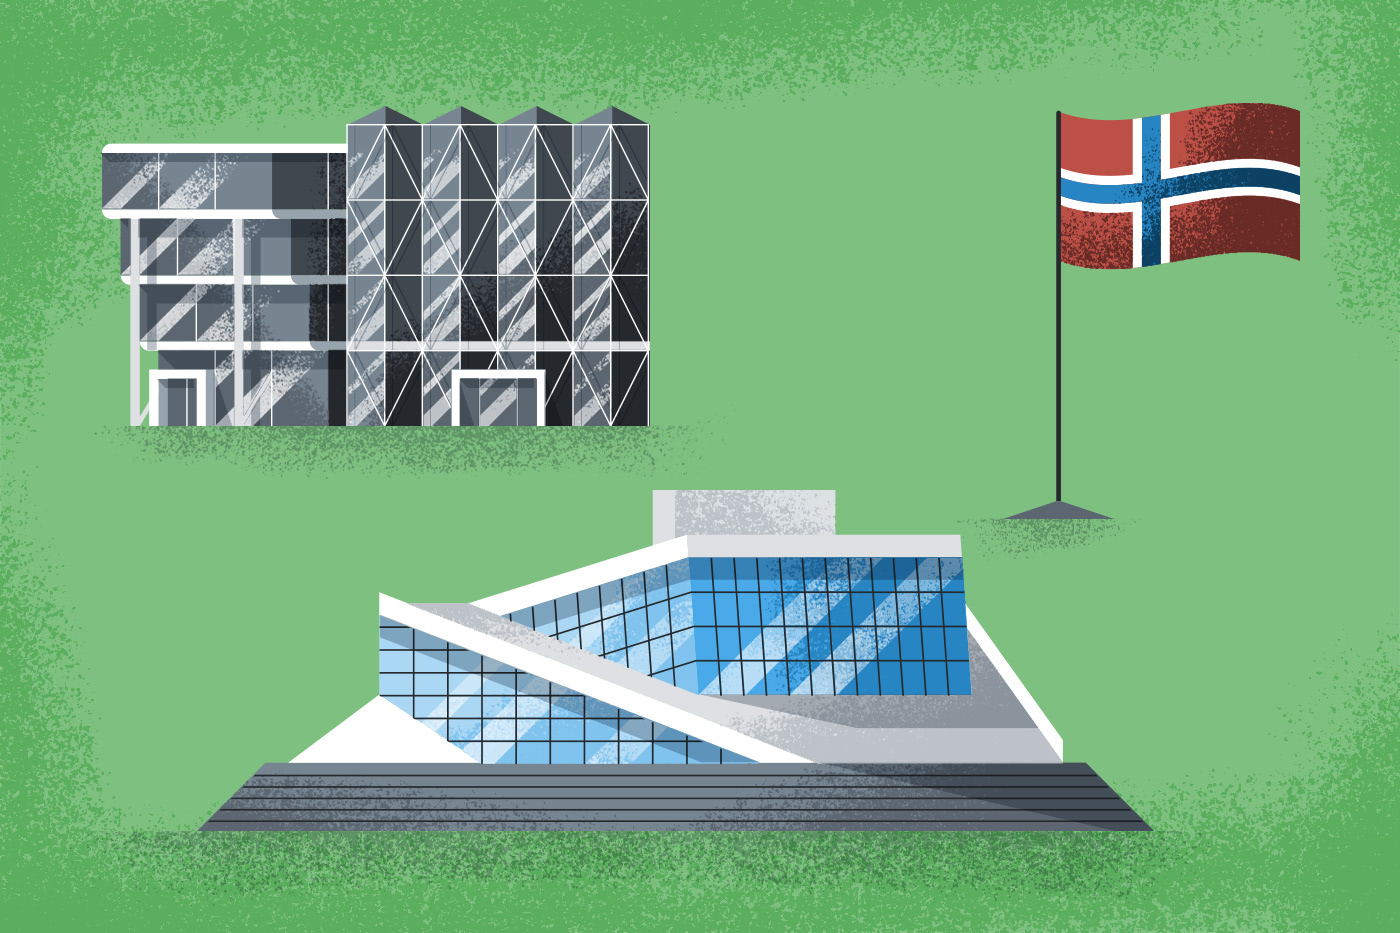 Illustrated icons of Oslo’s opera house and Felix conference center by Adrian Bauer